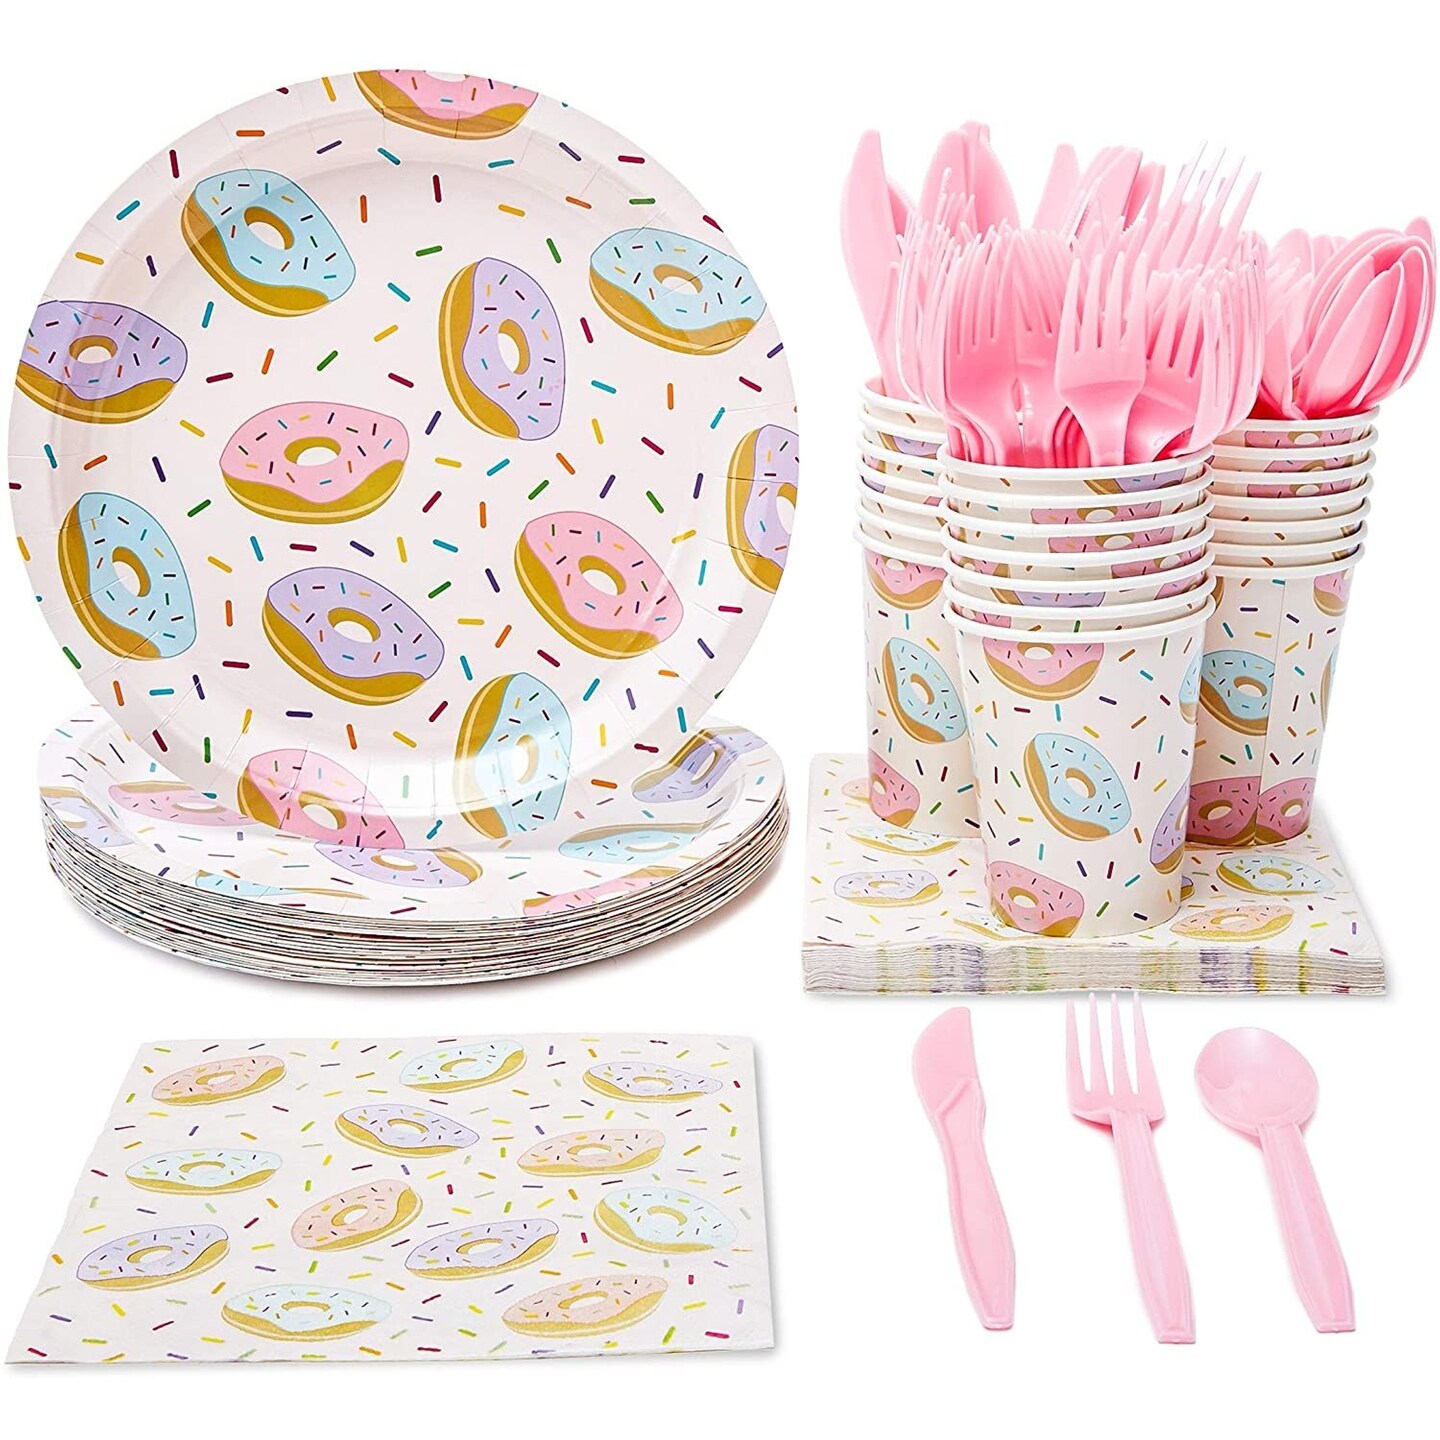 144 Piece Donut Grow Up Party Supplies - Serves 24 Sprinkle Paper Plates, Napkins, Cups and Cutlery for Two Sweet Birthday Decorations